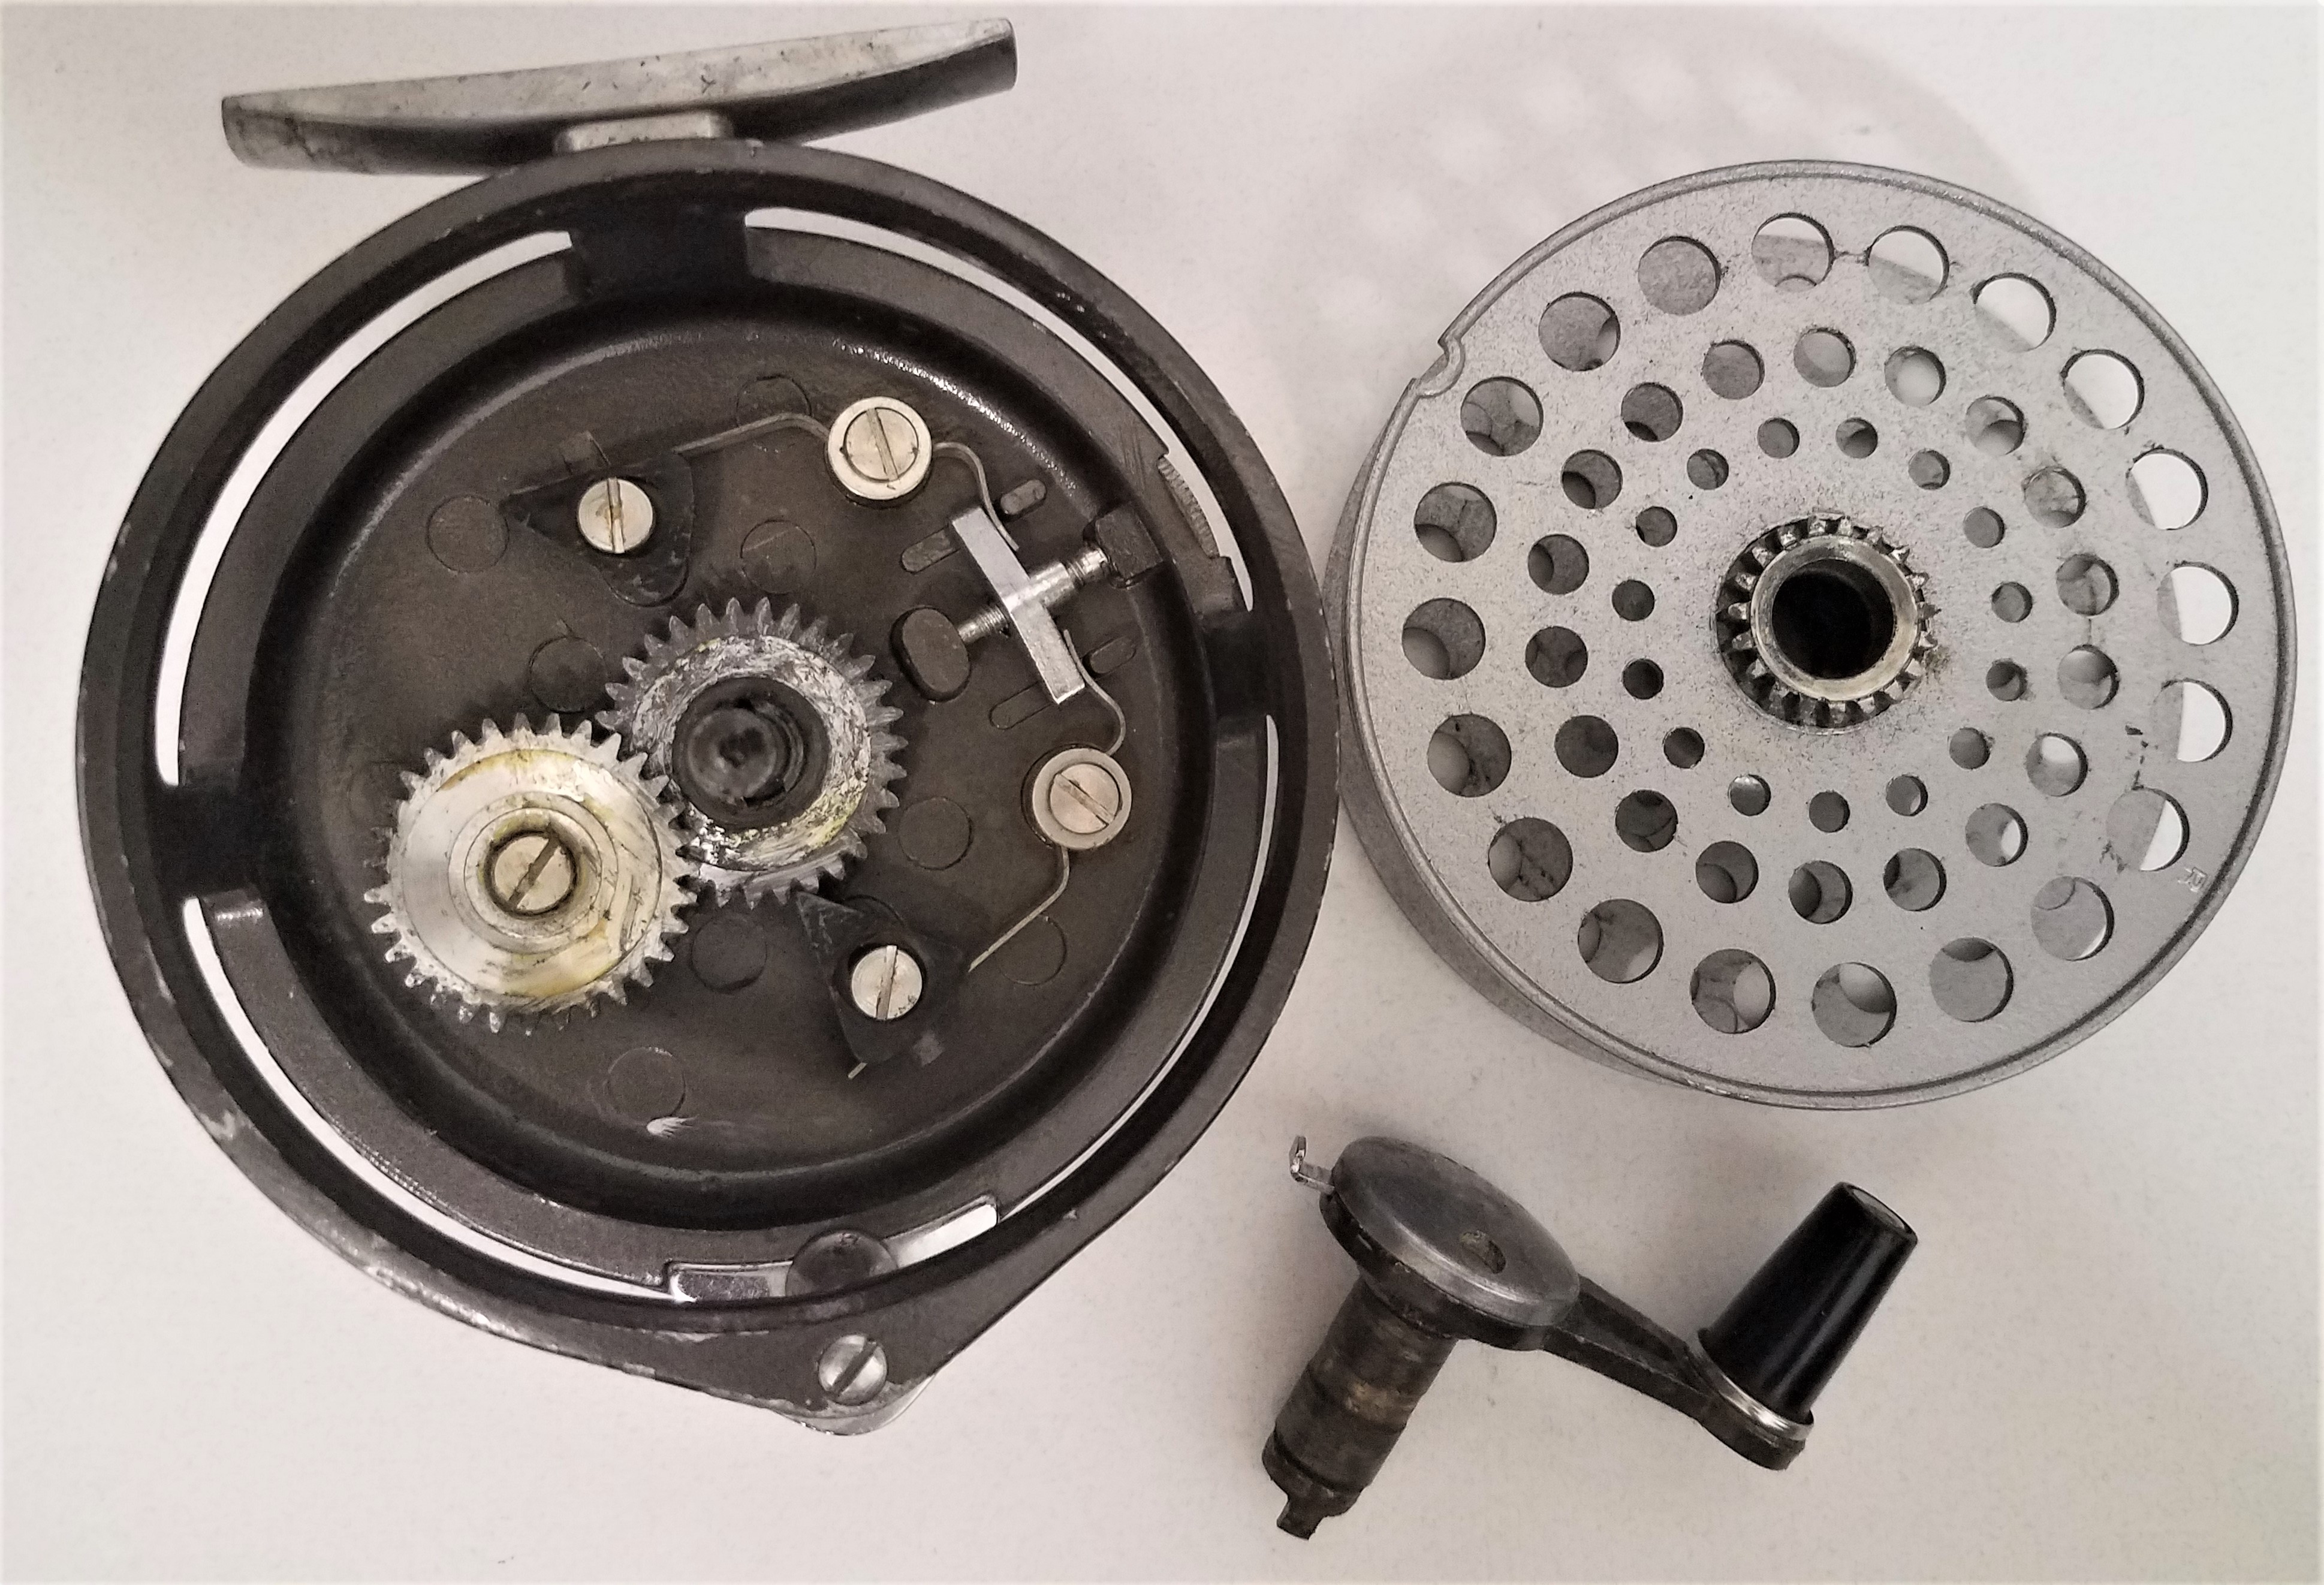 Cortland Multiplier Problems, Classic Fly Reels